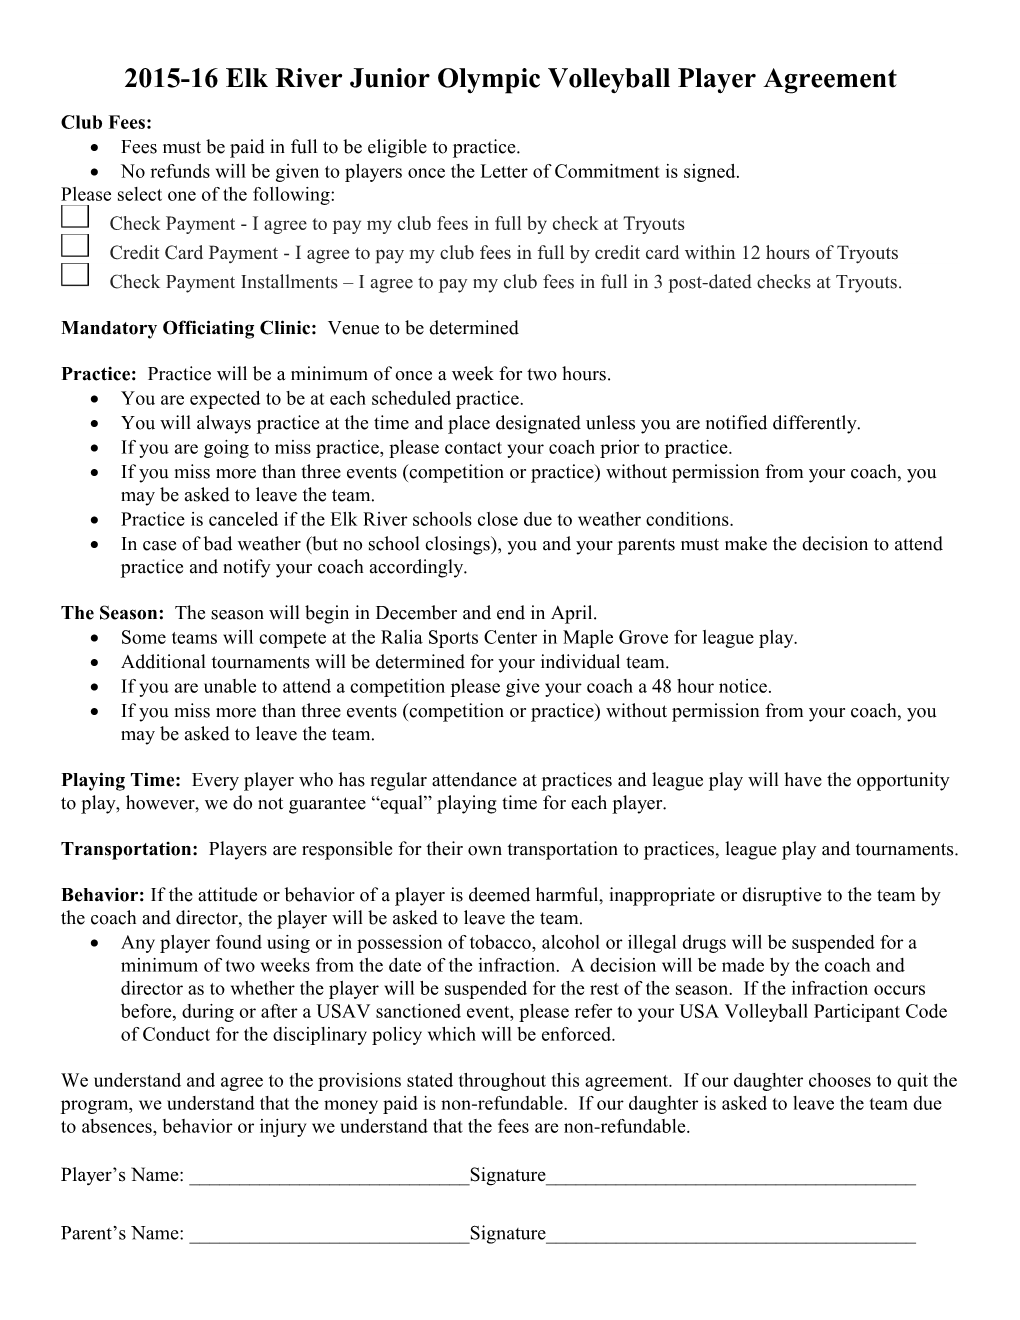 2009-10 Elk River Junior Olympic Volleyball Player Agreement